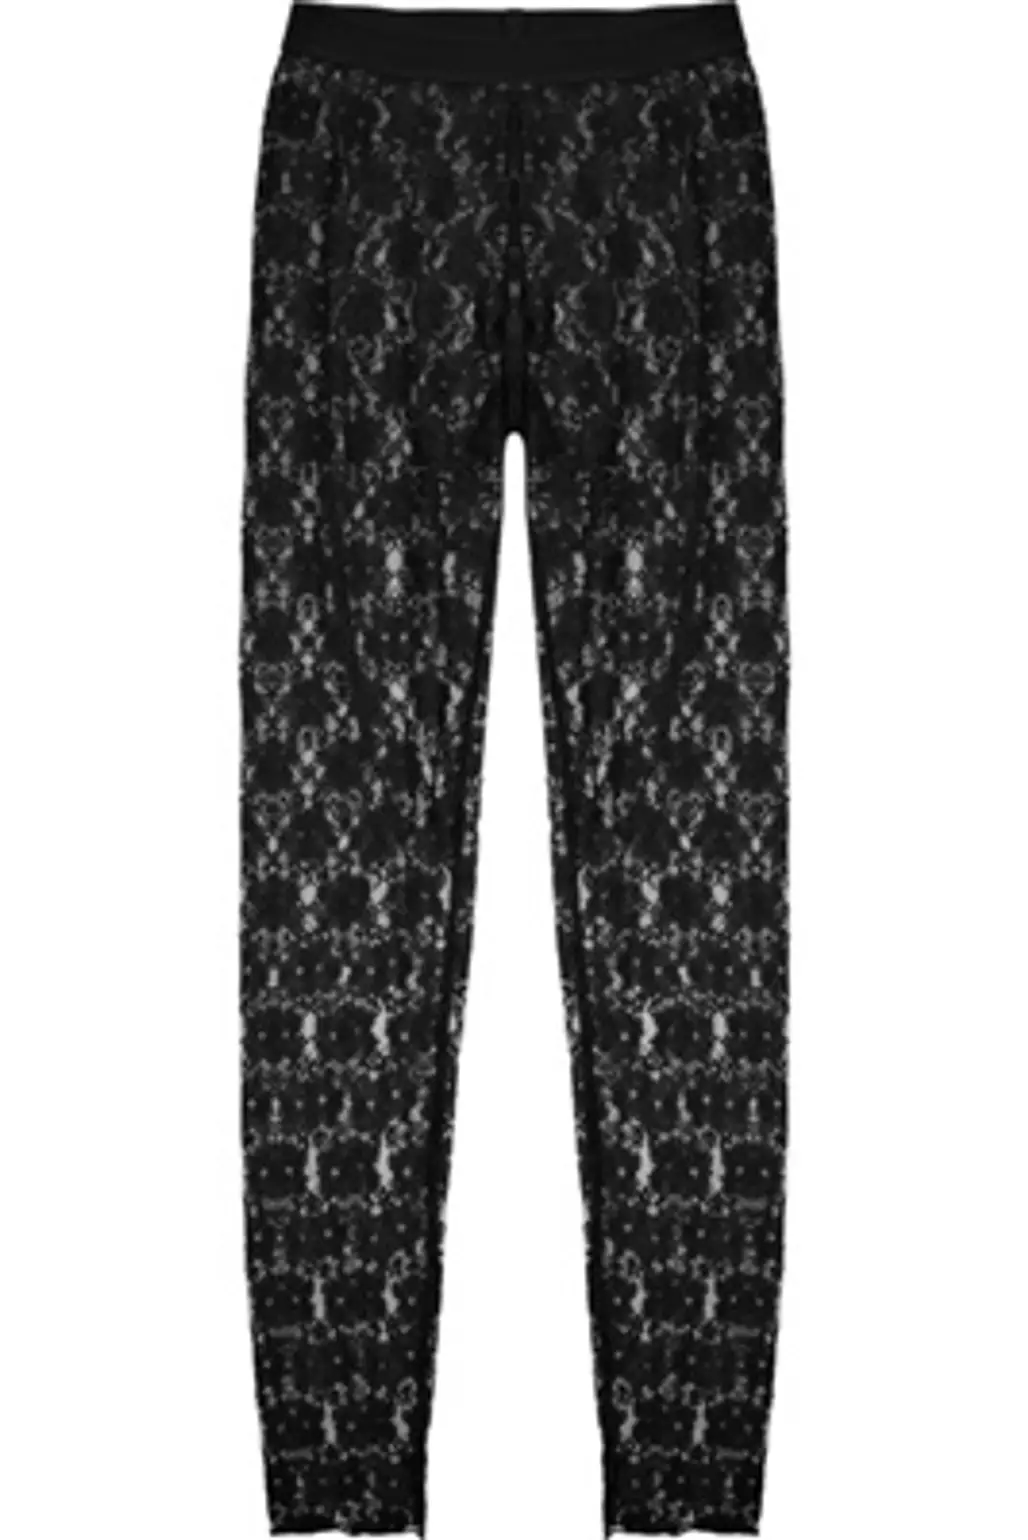 By Malene Birger Luono Sheer Floral-Lace Leggings